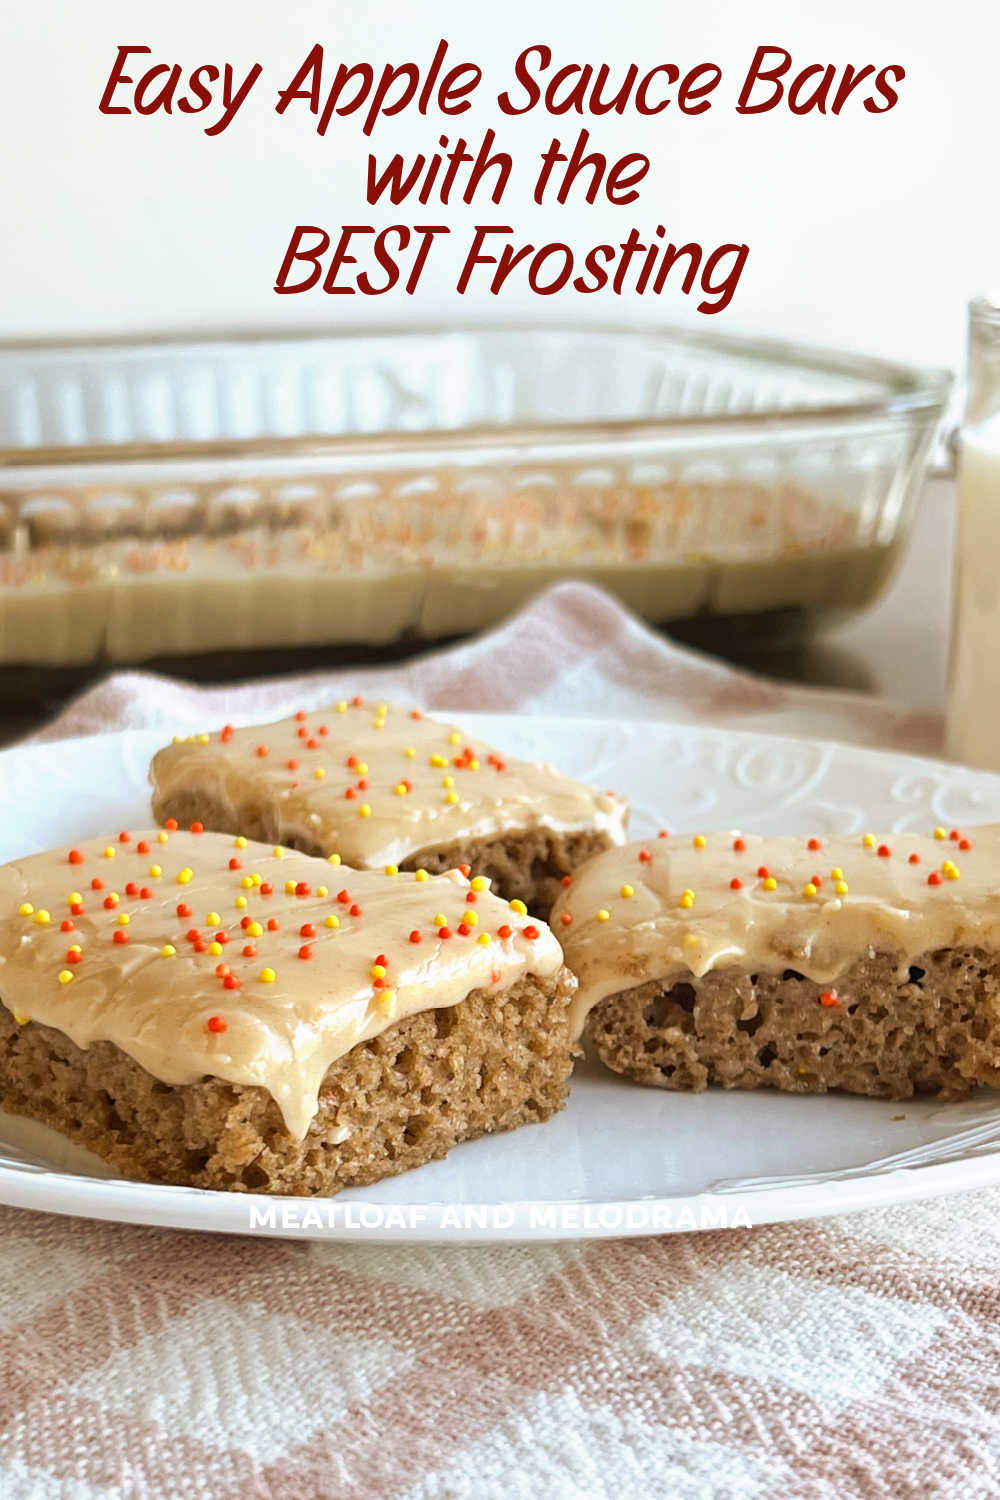 Easy Applesauce Bars recipe with peanut butter cream cheese frosting are soft, cake-like bars with a hint of spice. The perfect fall treat or easy dessert! via @meamel